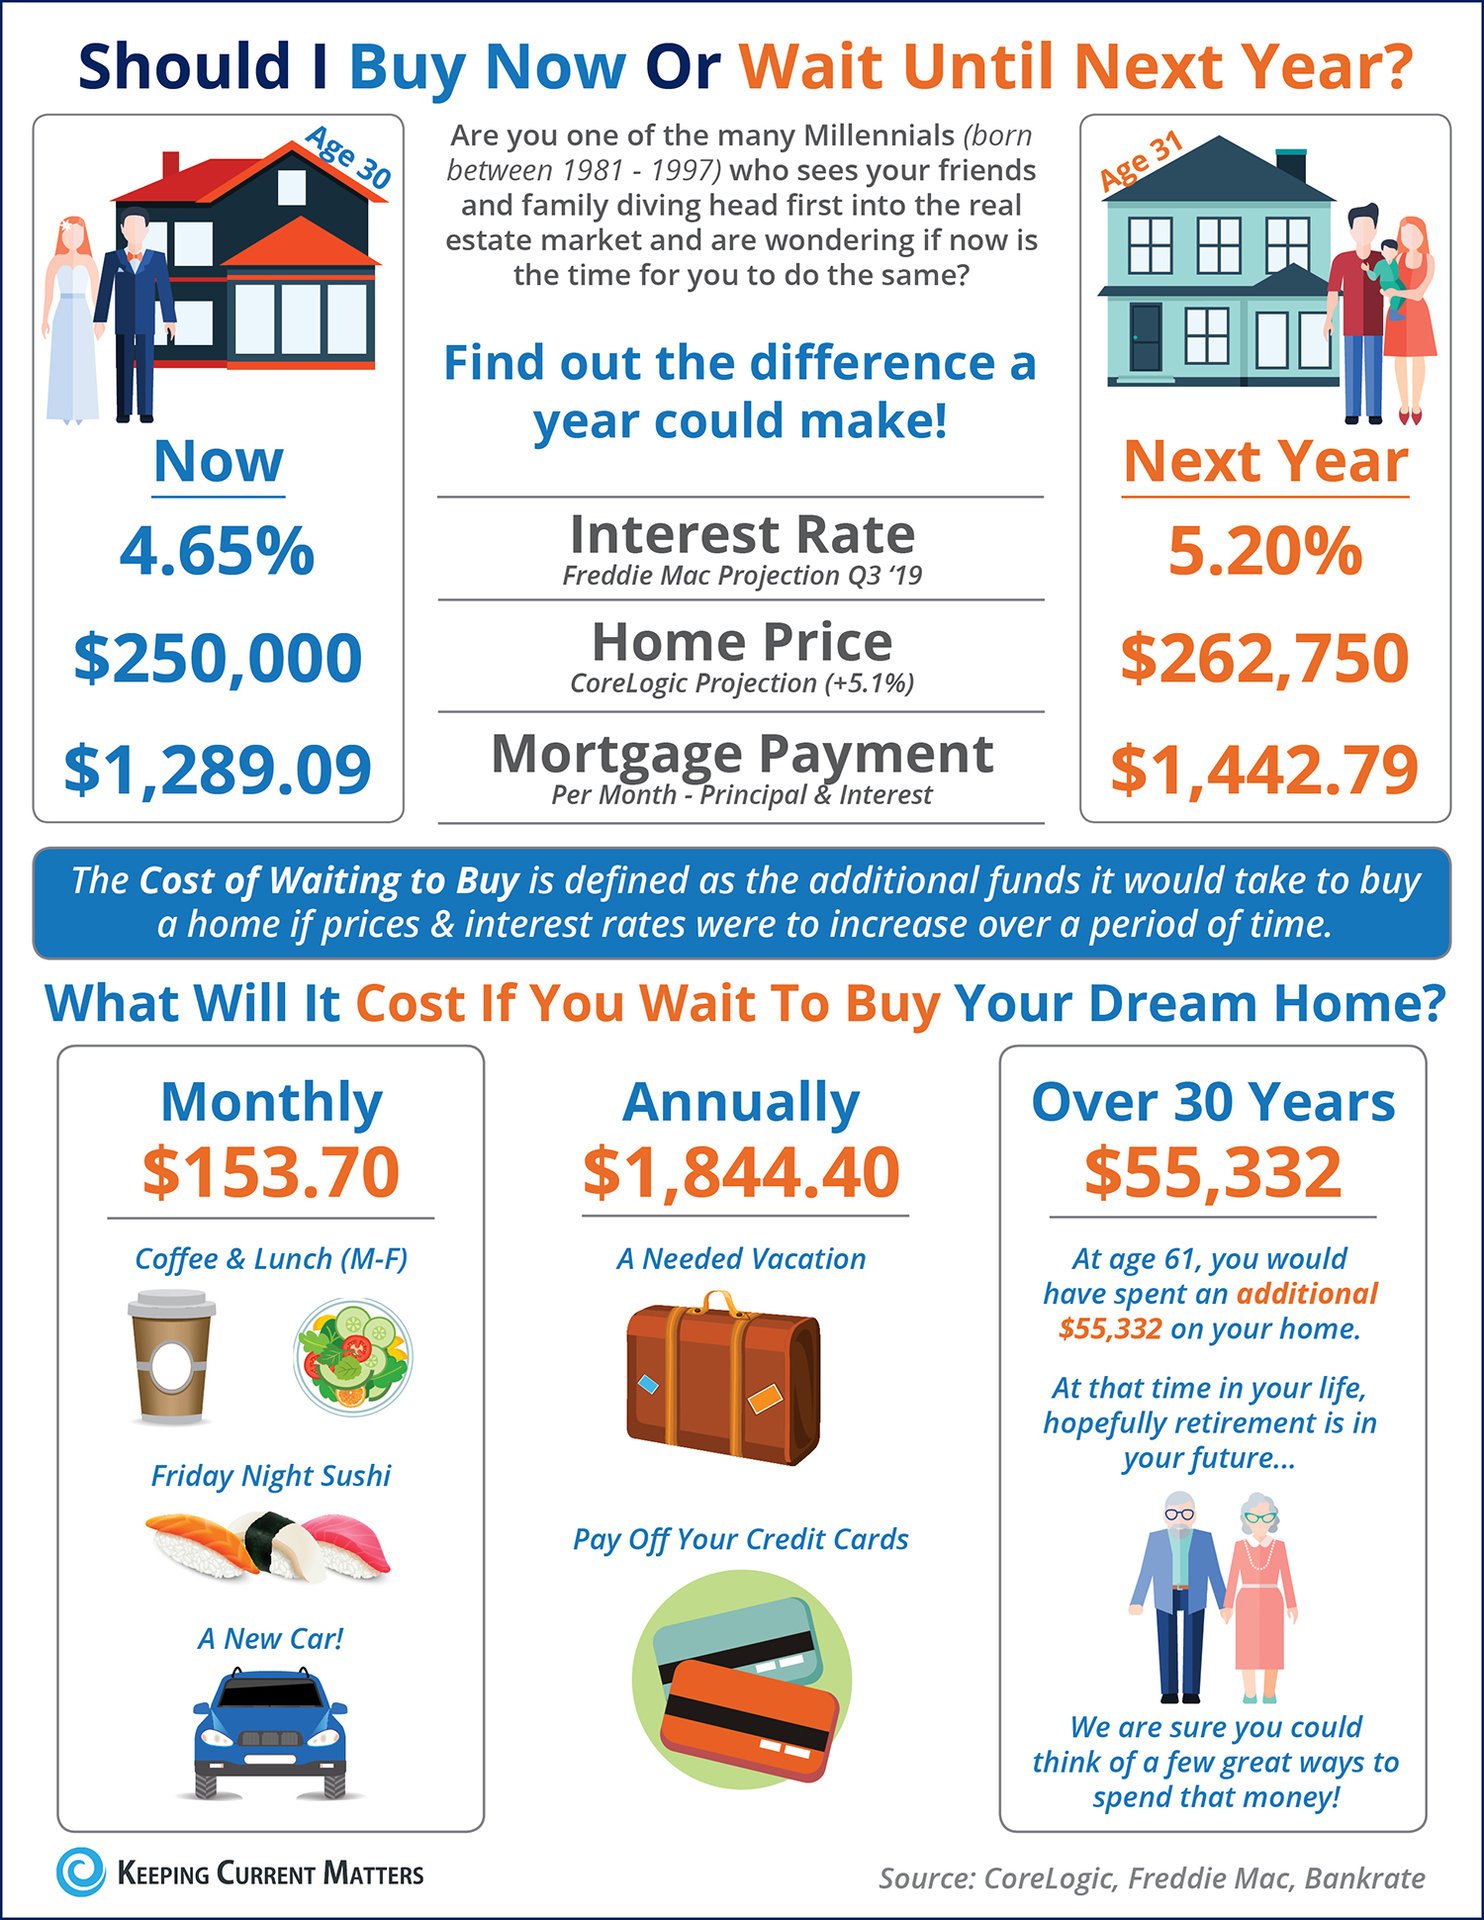 Should I Buy Now? Or Wait Until Next Year? [INFOGRAPHIC] | Keeping Current Matters